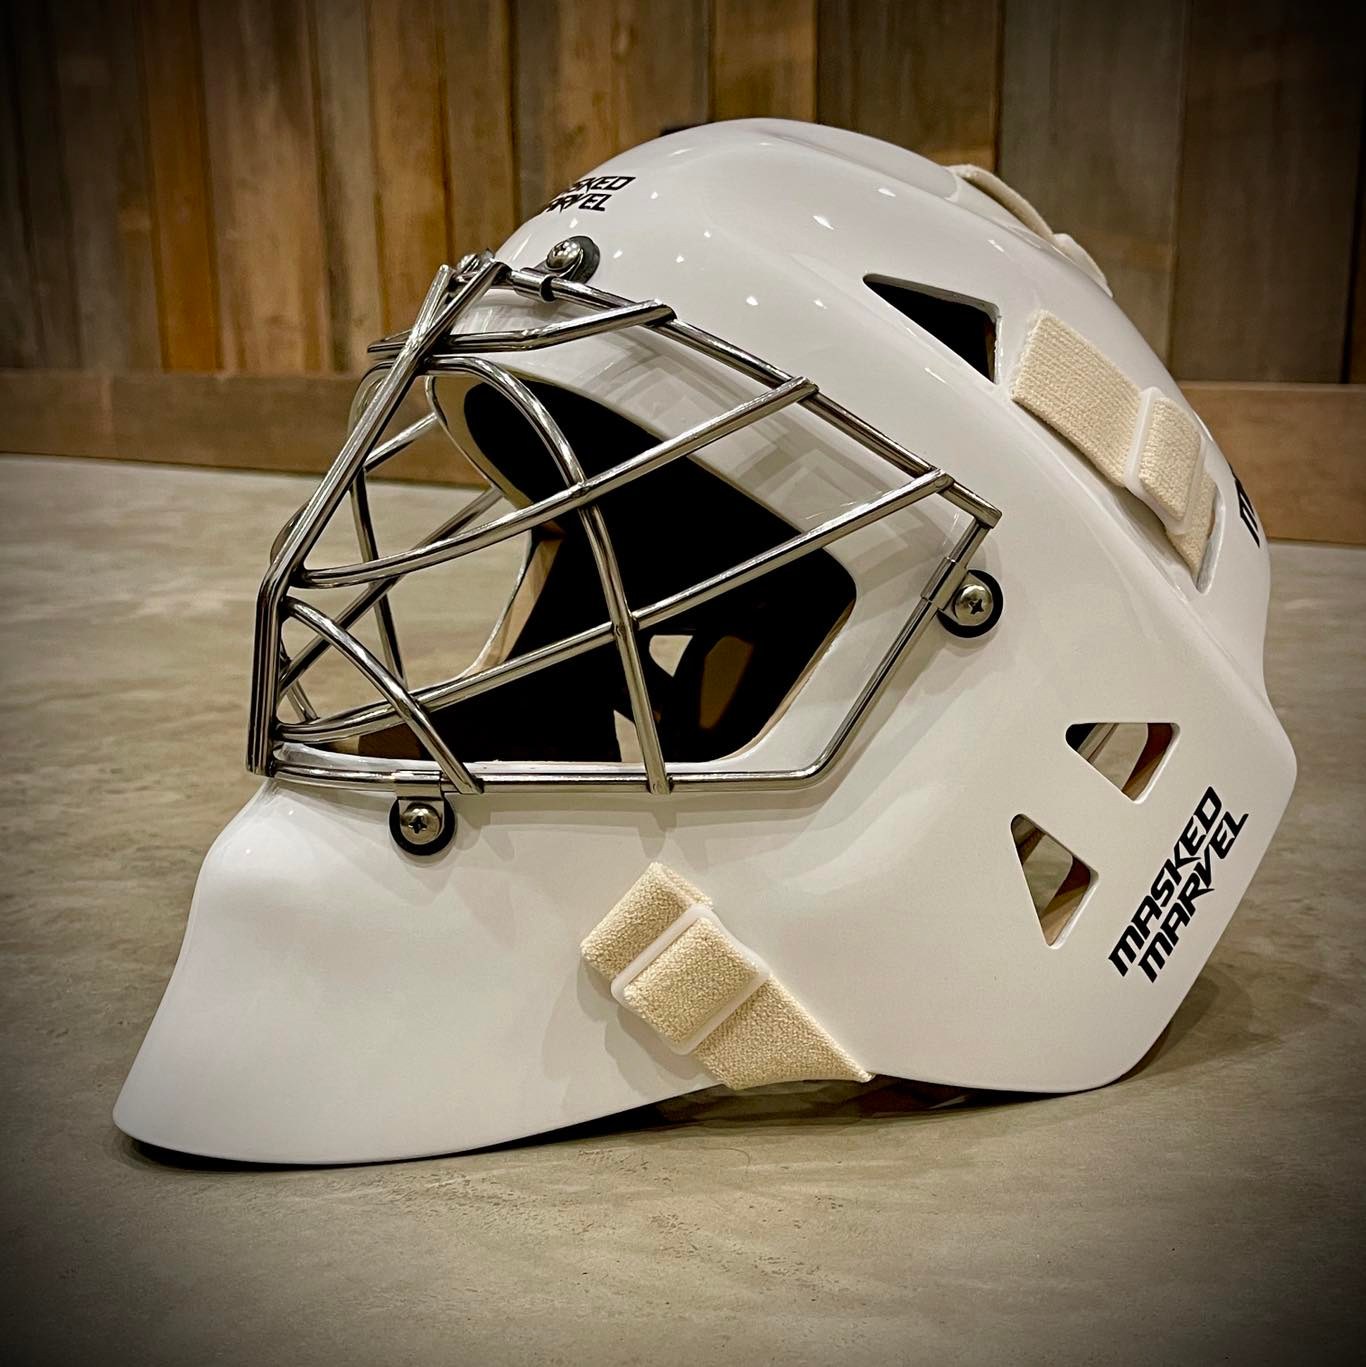 Cages for Goalie Masks, Pro, Cateye, Approved